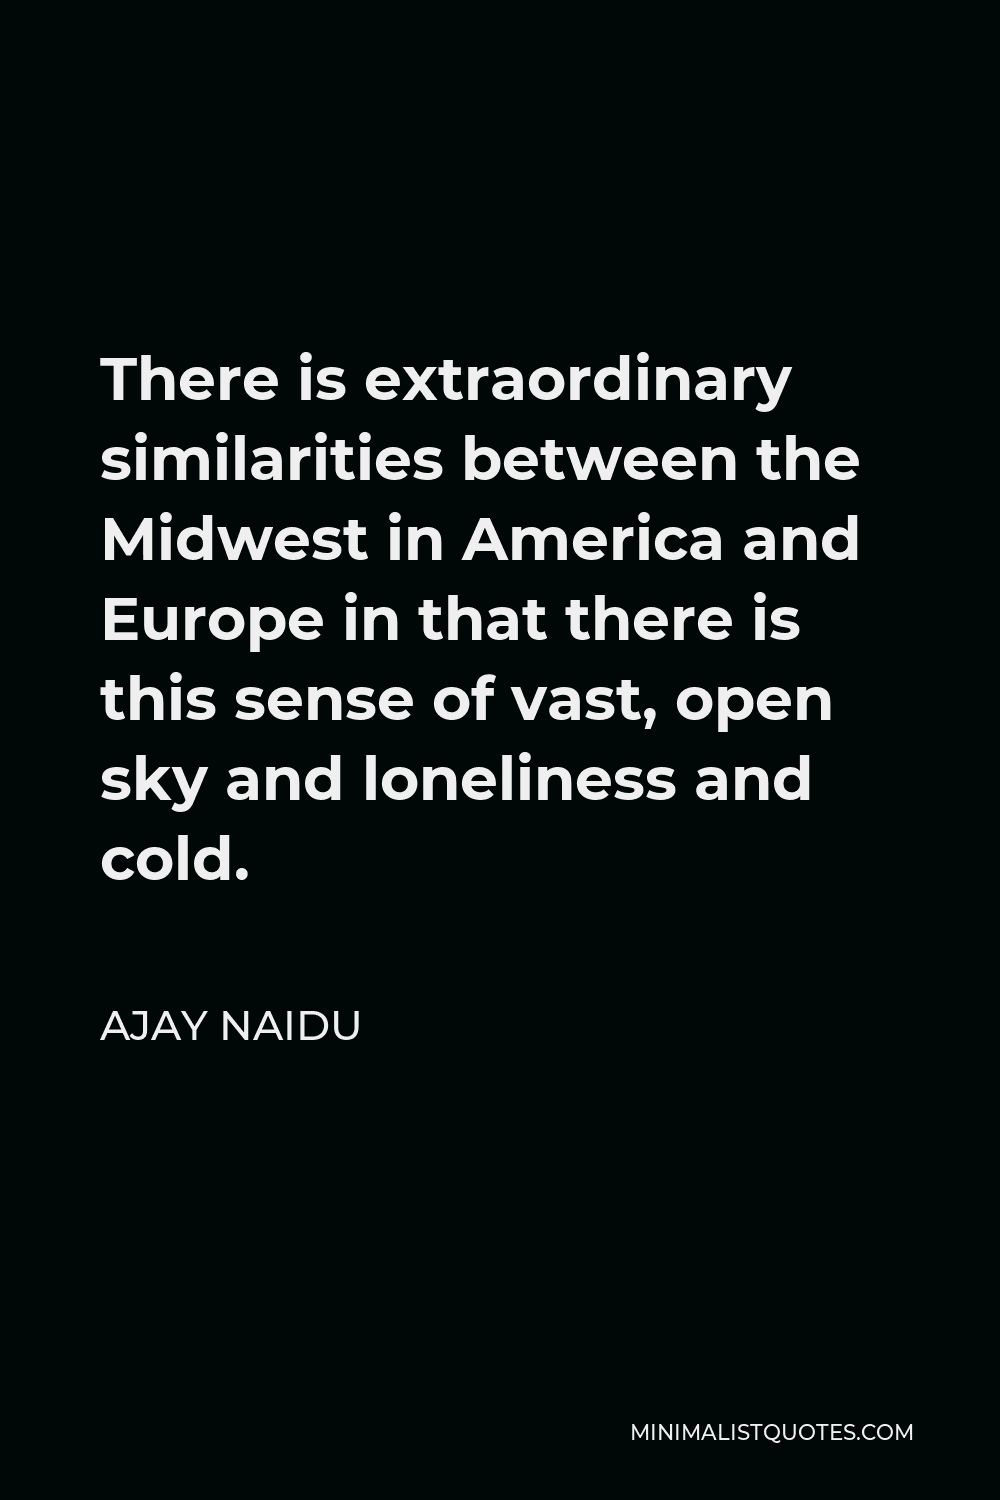 Ajay Naidu Quote - There is extraordinary similarities between the Midwest in America and Europe in that there is this sense of vast, open sky and loneliness and cold.